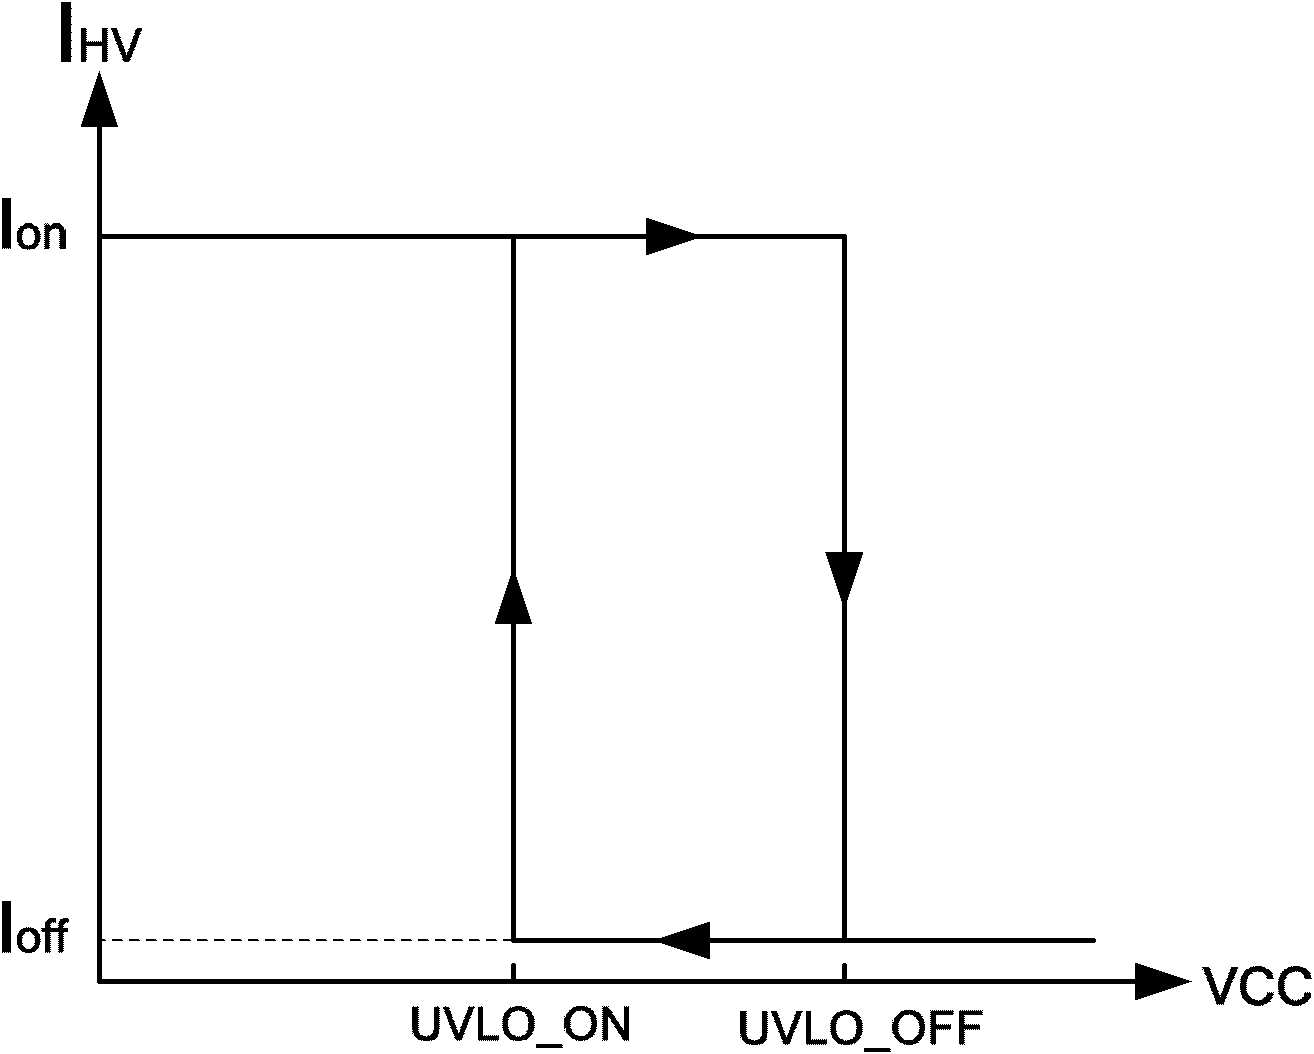 High voltage starting circuit applied to AC/DC converter